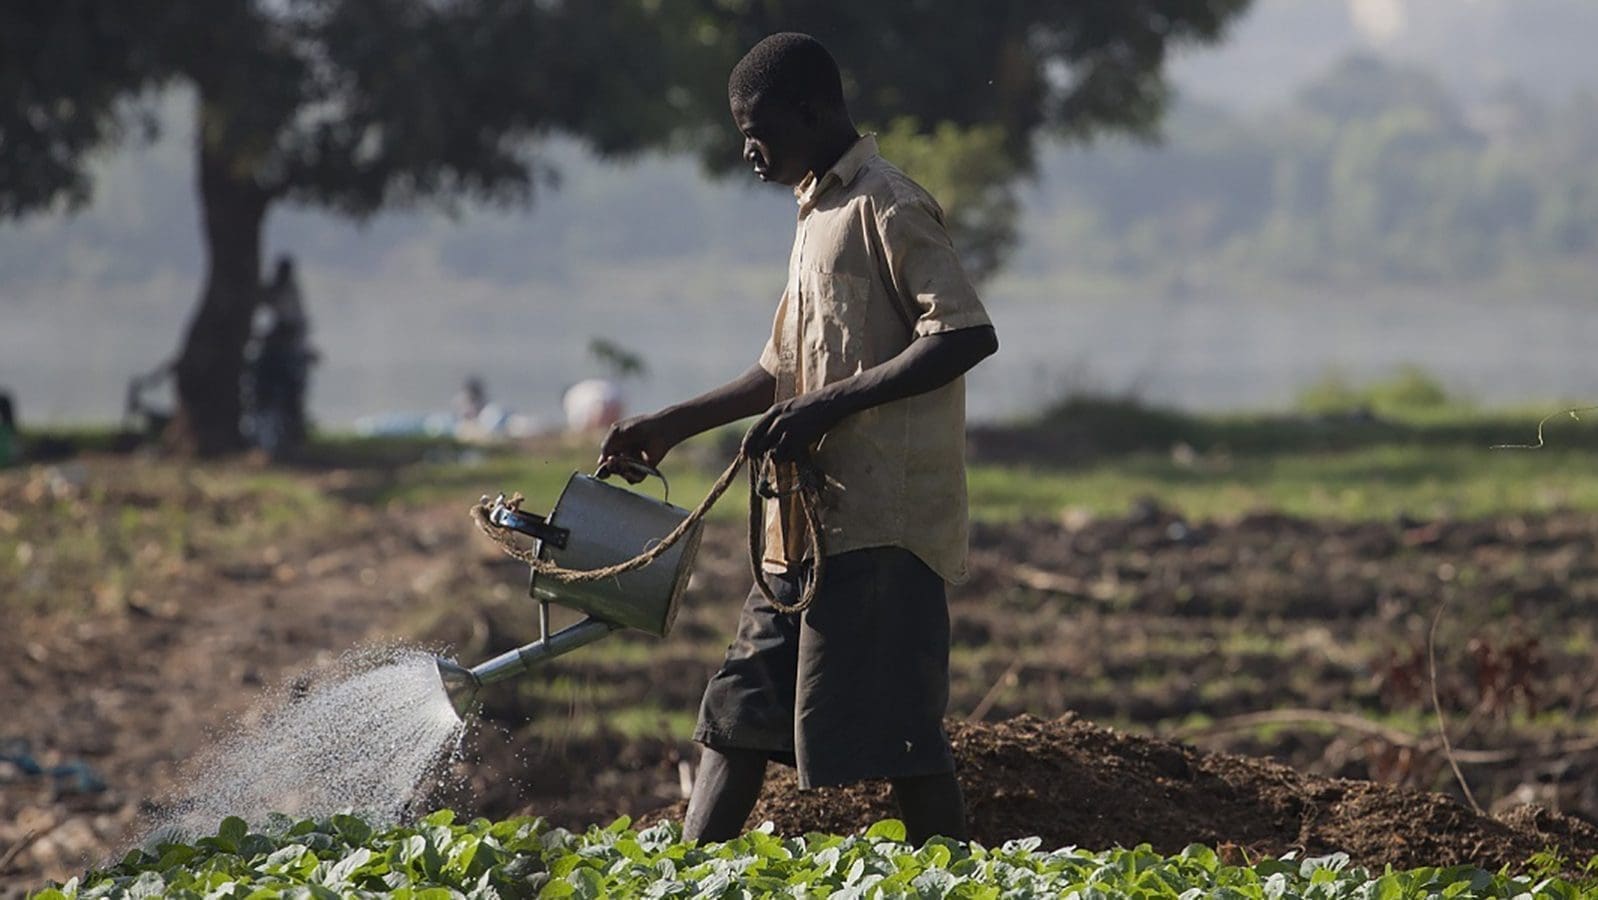 World Bank provides US$200 million to strengthen irrigation services in Cameroon